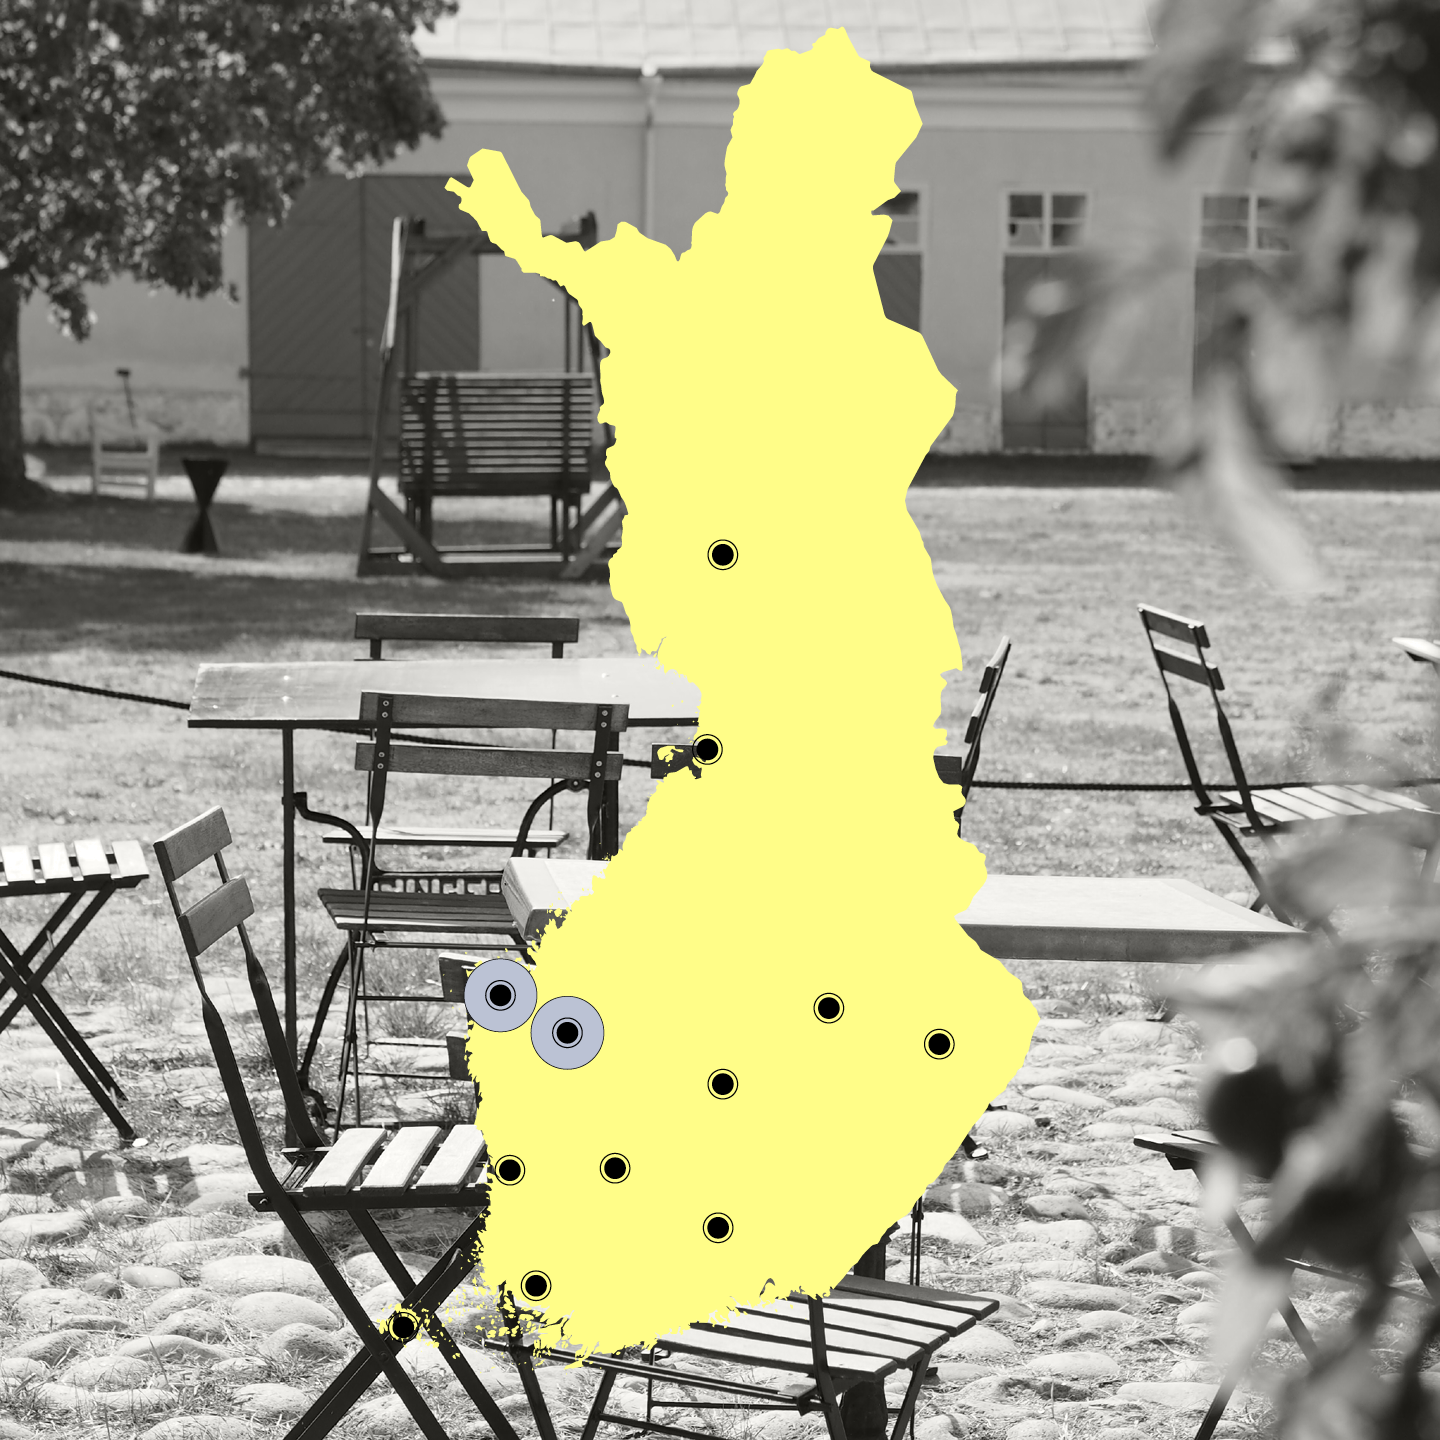 An image of the map of Finland, with Vaasa and Seinäjoki highlighted. In the background, there is an image of some chairs and tables outside.